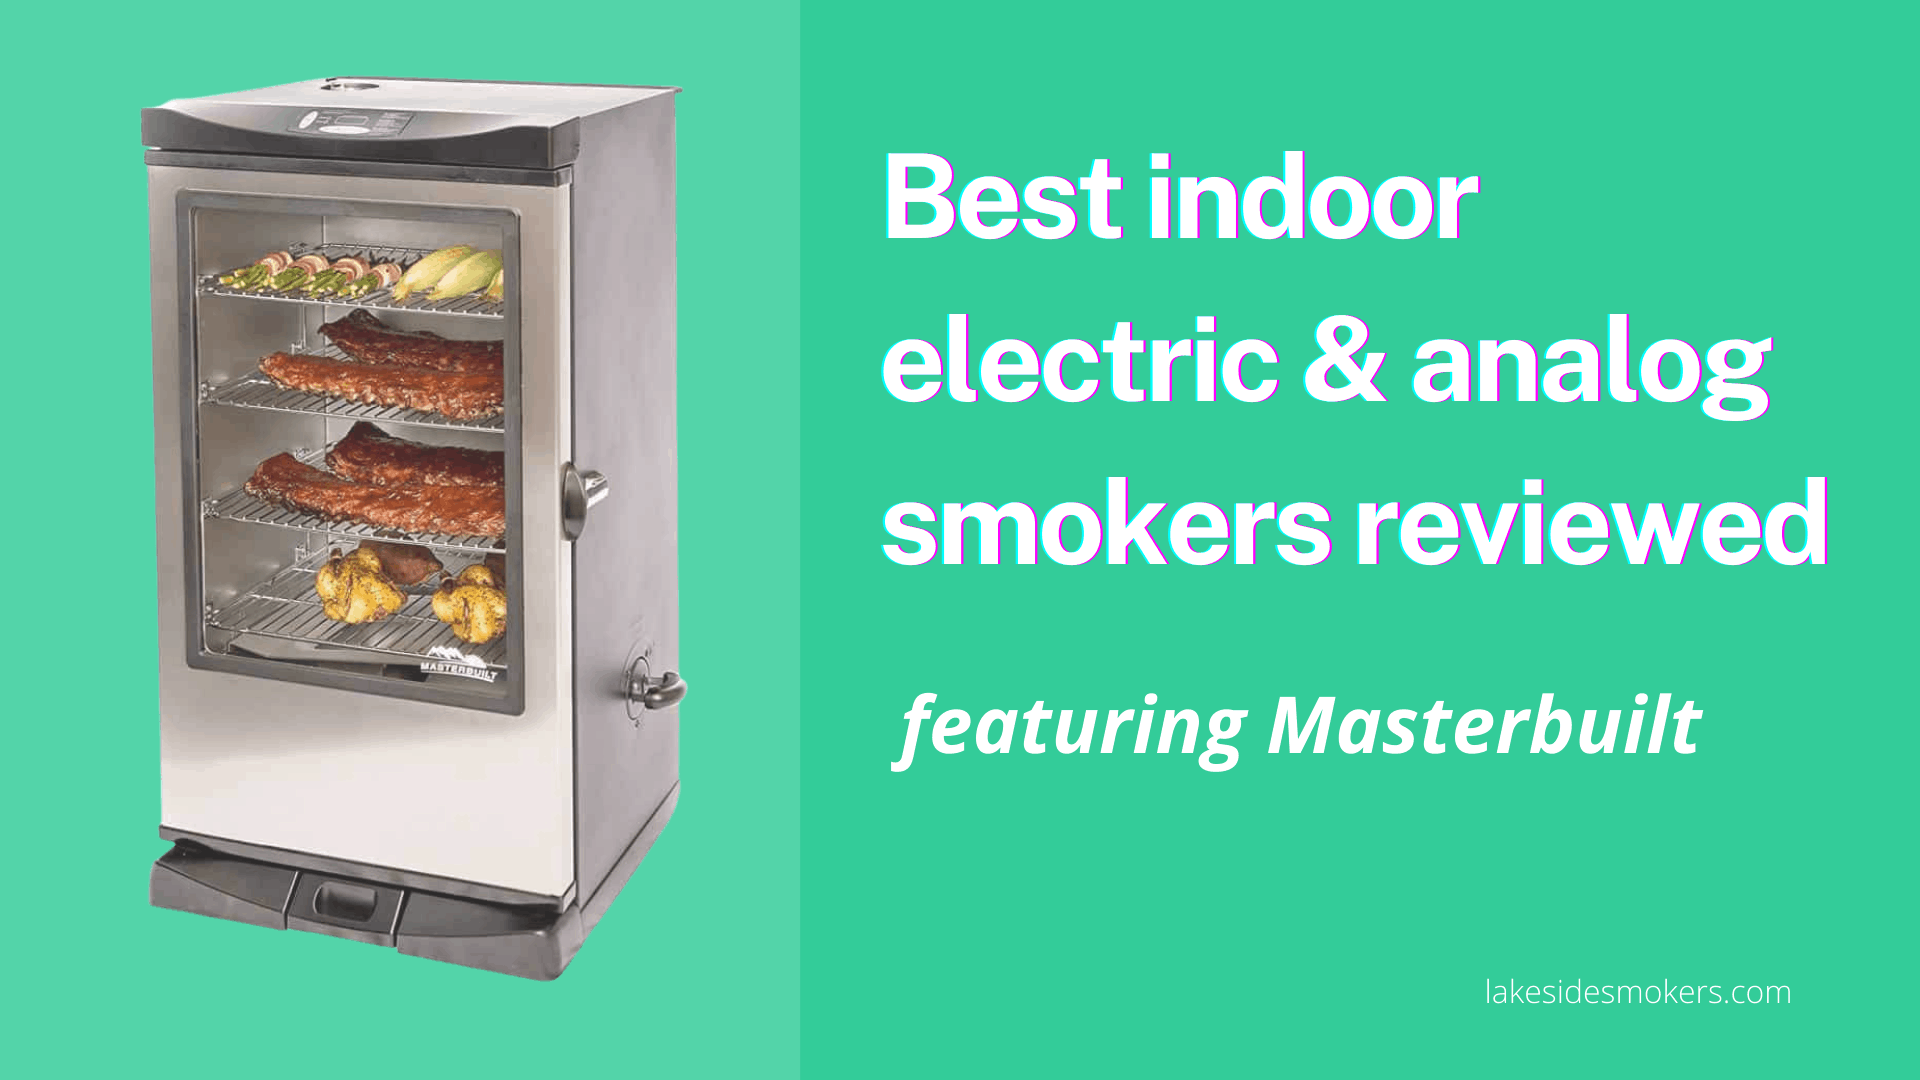 11 Best Indoor Electric & Analog Smokers Reviewed [BE SAFE!]